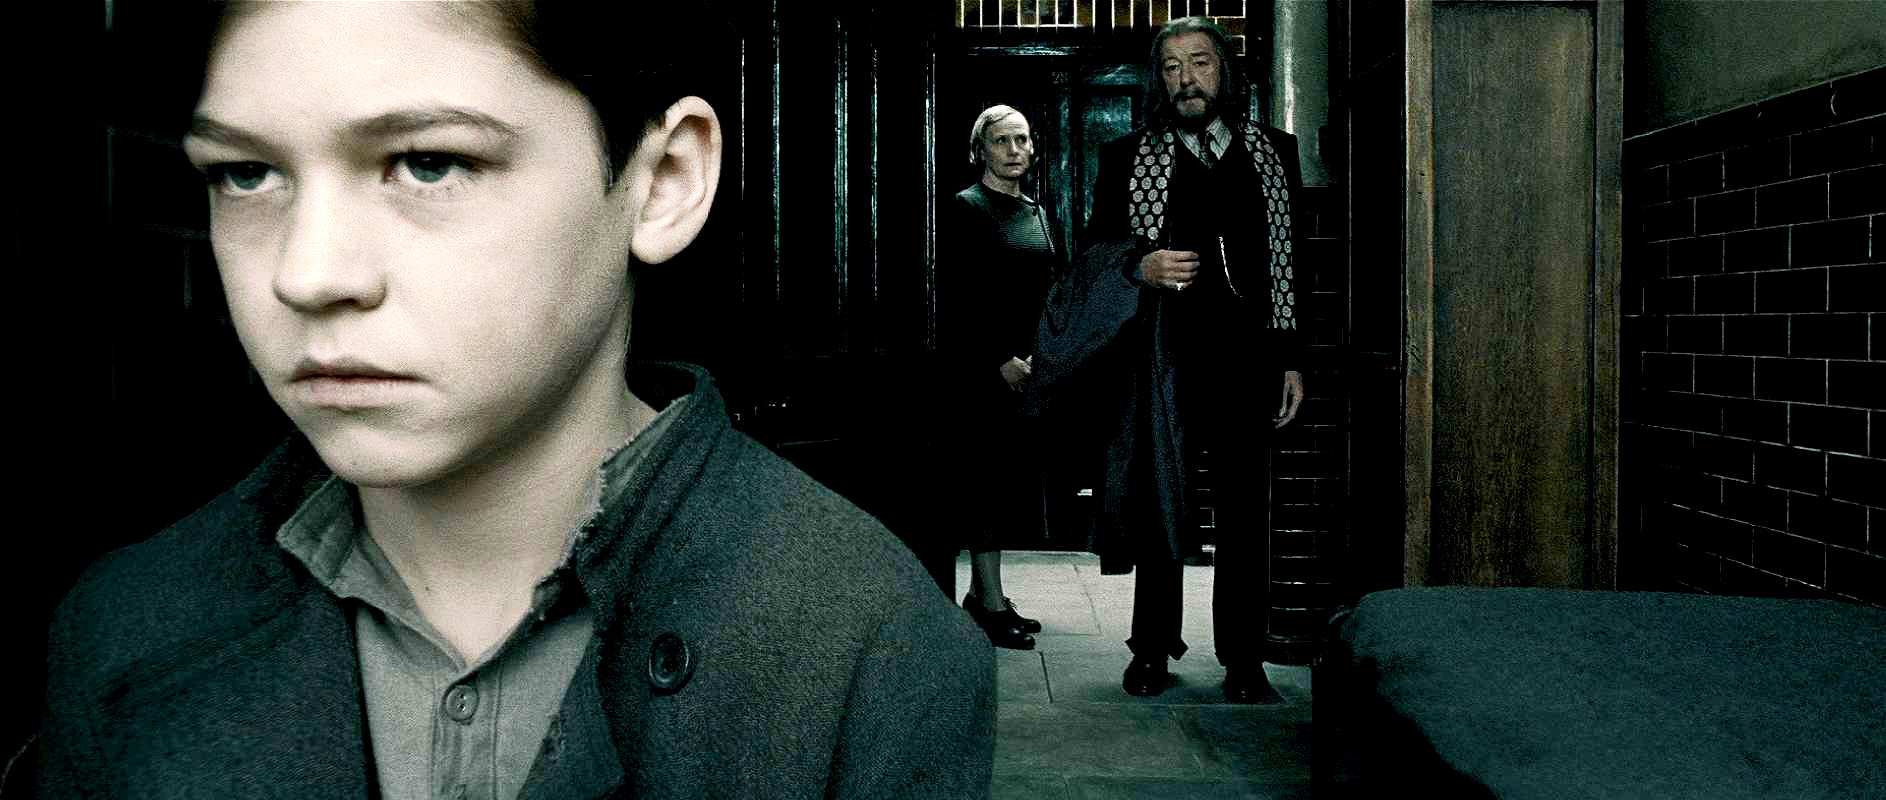 Hero Fiennes-Tiffin, Amelda Brown and Michael Gambon in Warner Bros Pictures' Harry Potter and the Half-Blood Prince (2009)